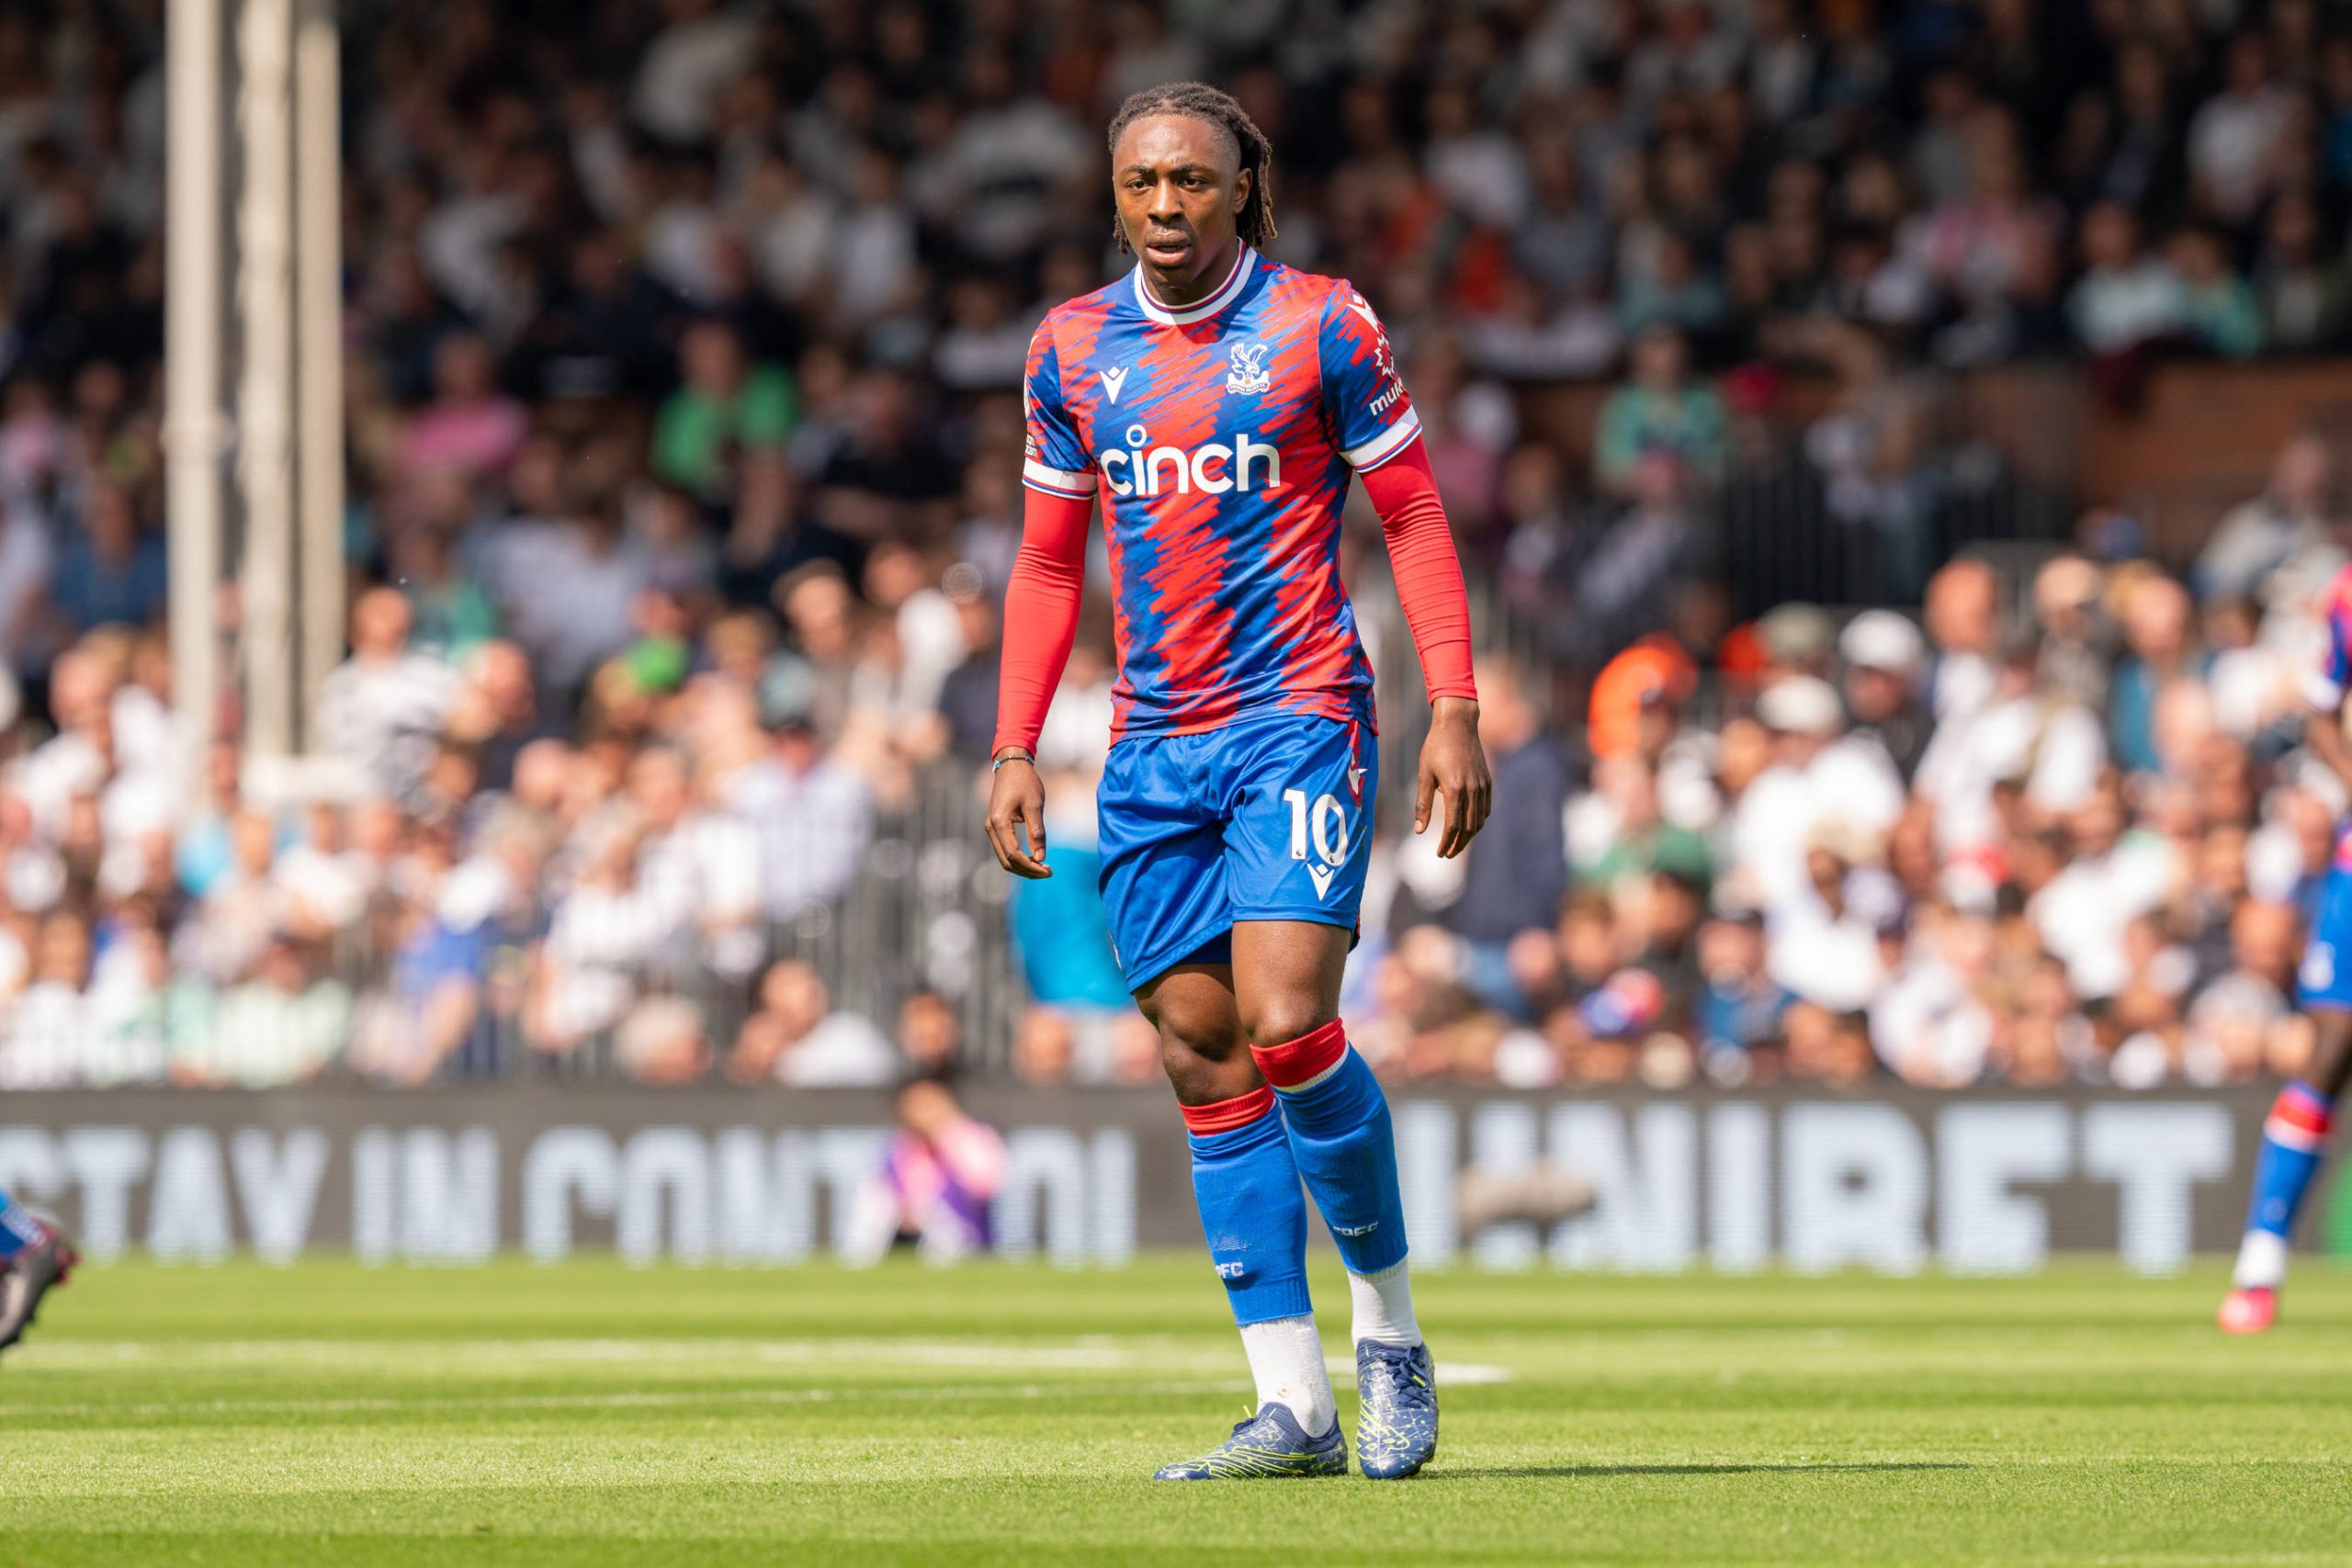 Fulham v Crystal Palace Premier League 20/05/2023. Crystal Palace midfielder Eberechi Eze 10 during the Premier League match between Fulham and Crystal Palace at Craven Cottage, London, England on 20 May 2023. Editorial use only DataCo restrictions apply See www.football-dataco.com , Copyright: xStephenxFlynnx PSI-17464-0025